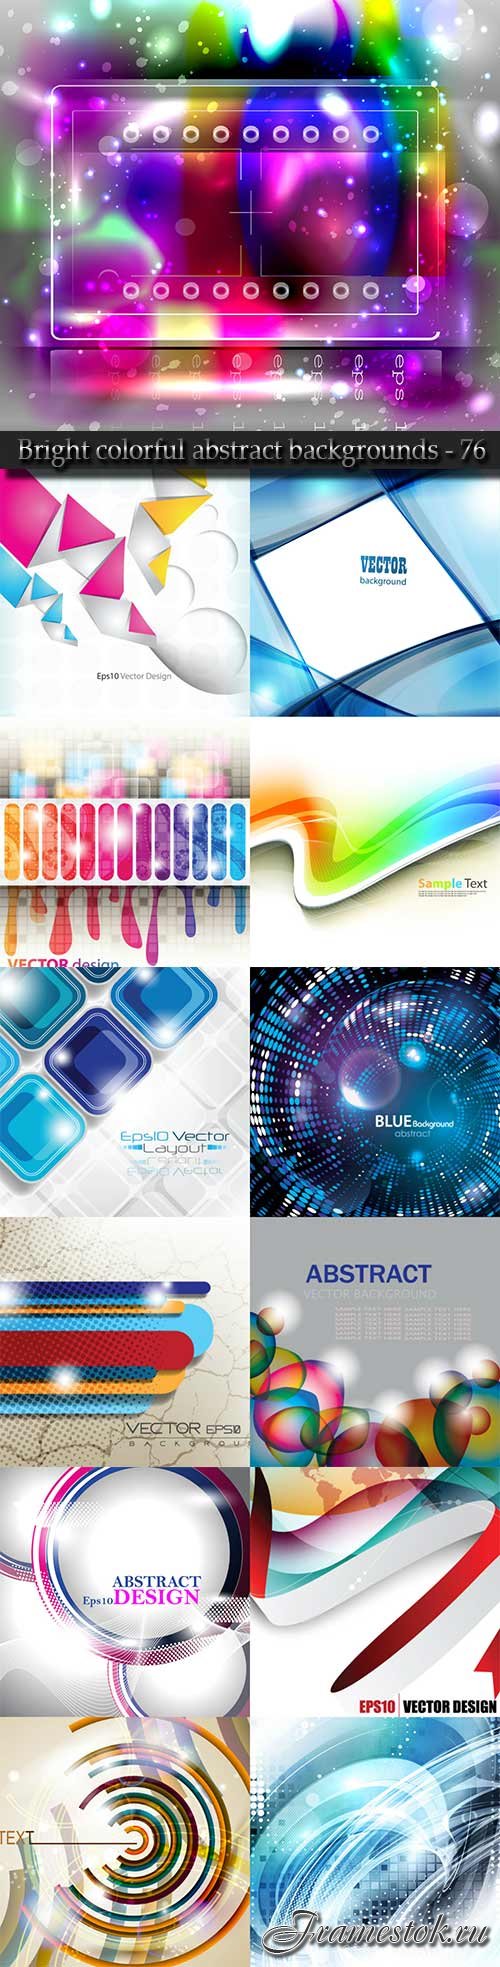 Bright colorful abstract backgrounds vector - 76